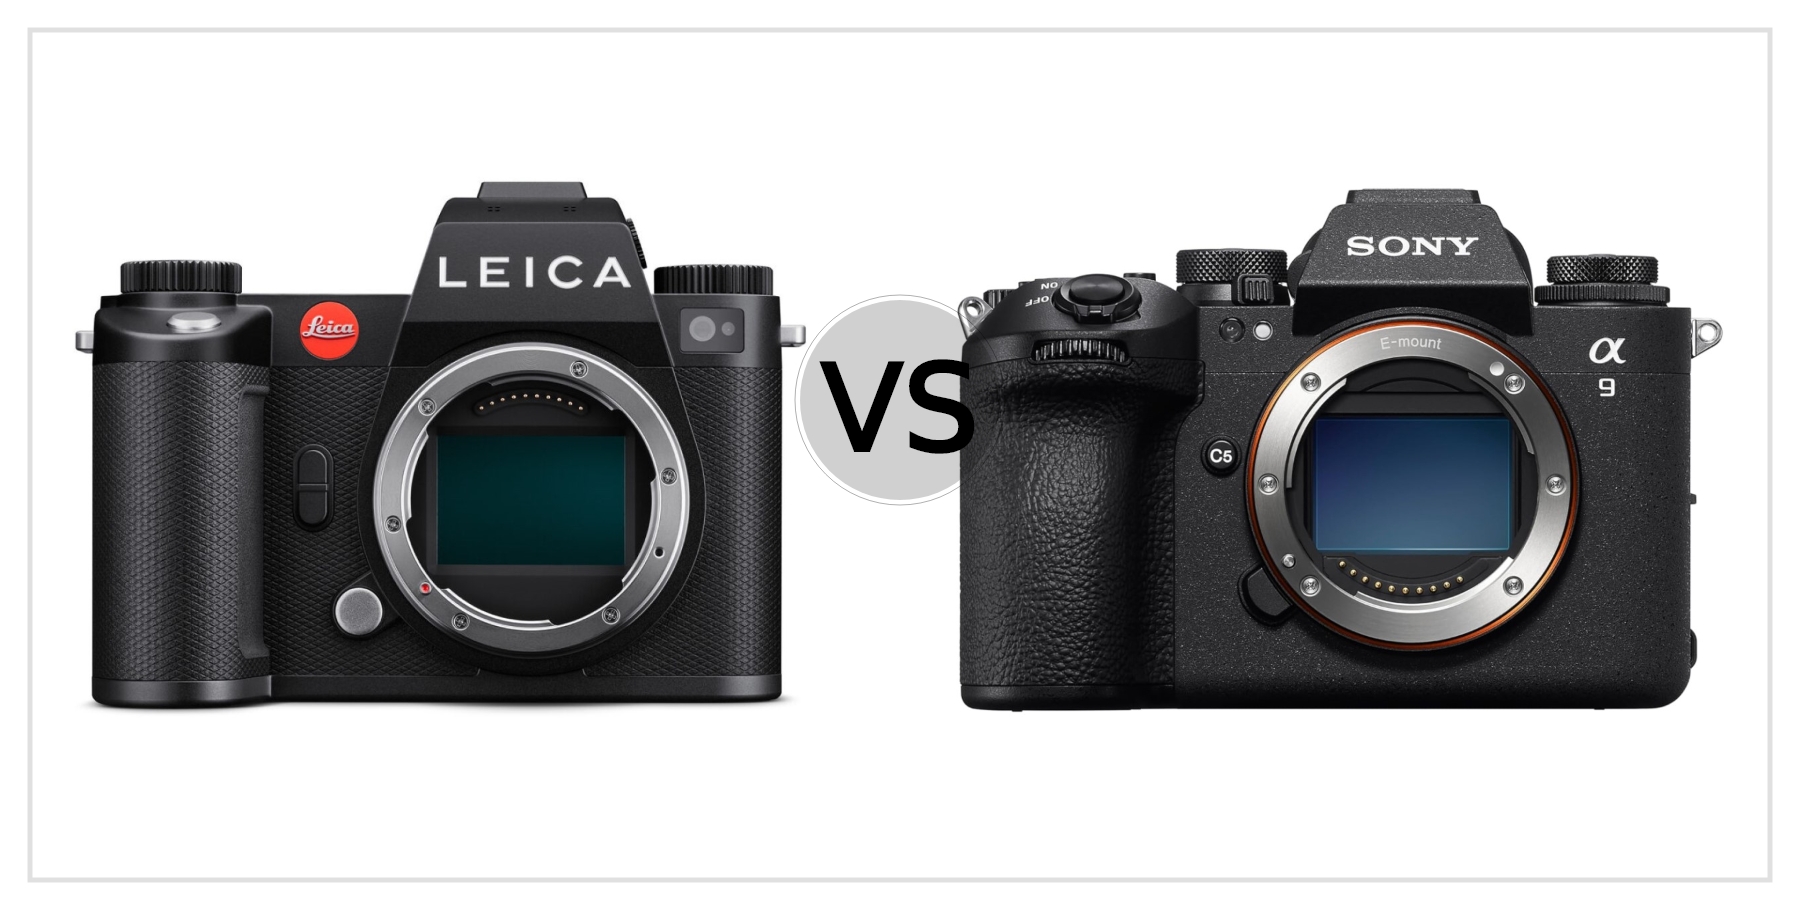 Compare Leica SL3 VS Sony A9 Mark III to see which is better